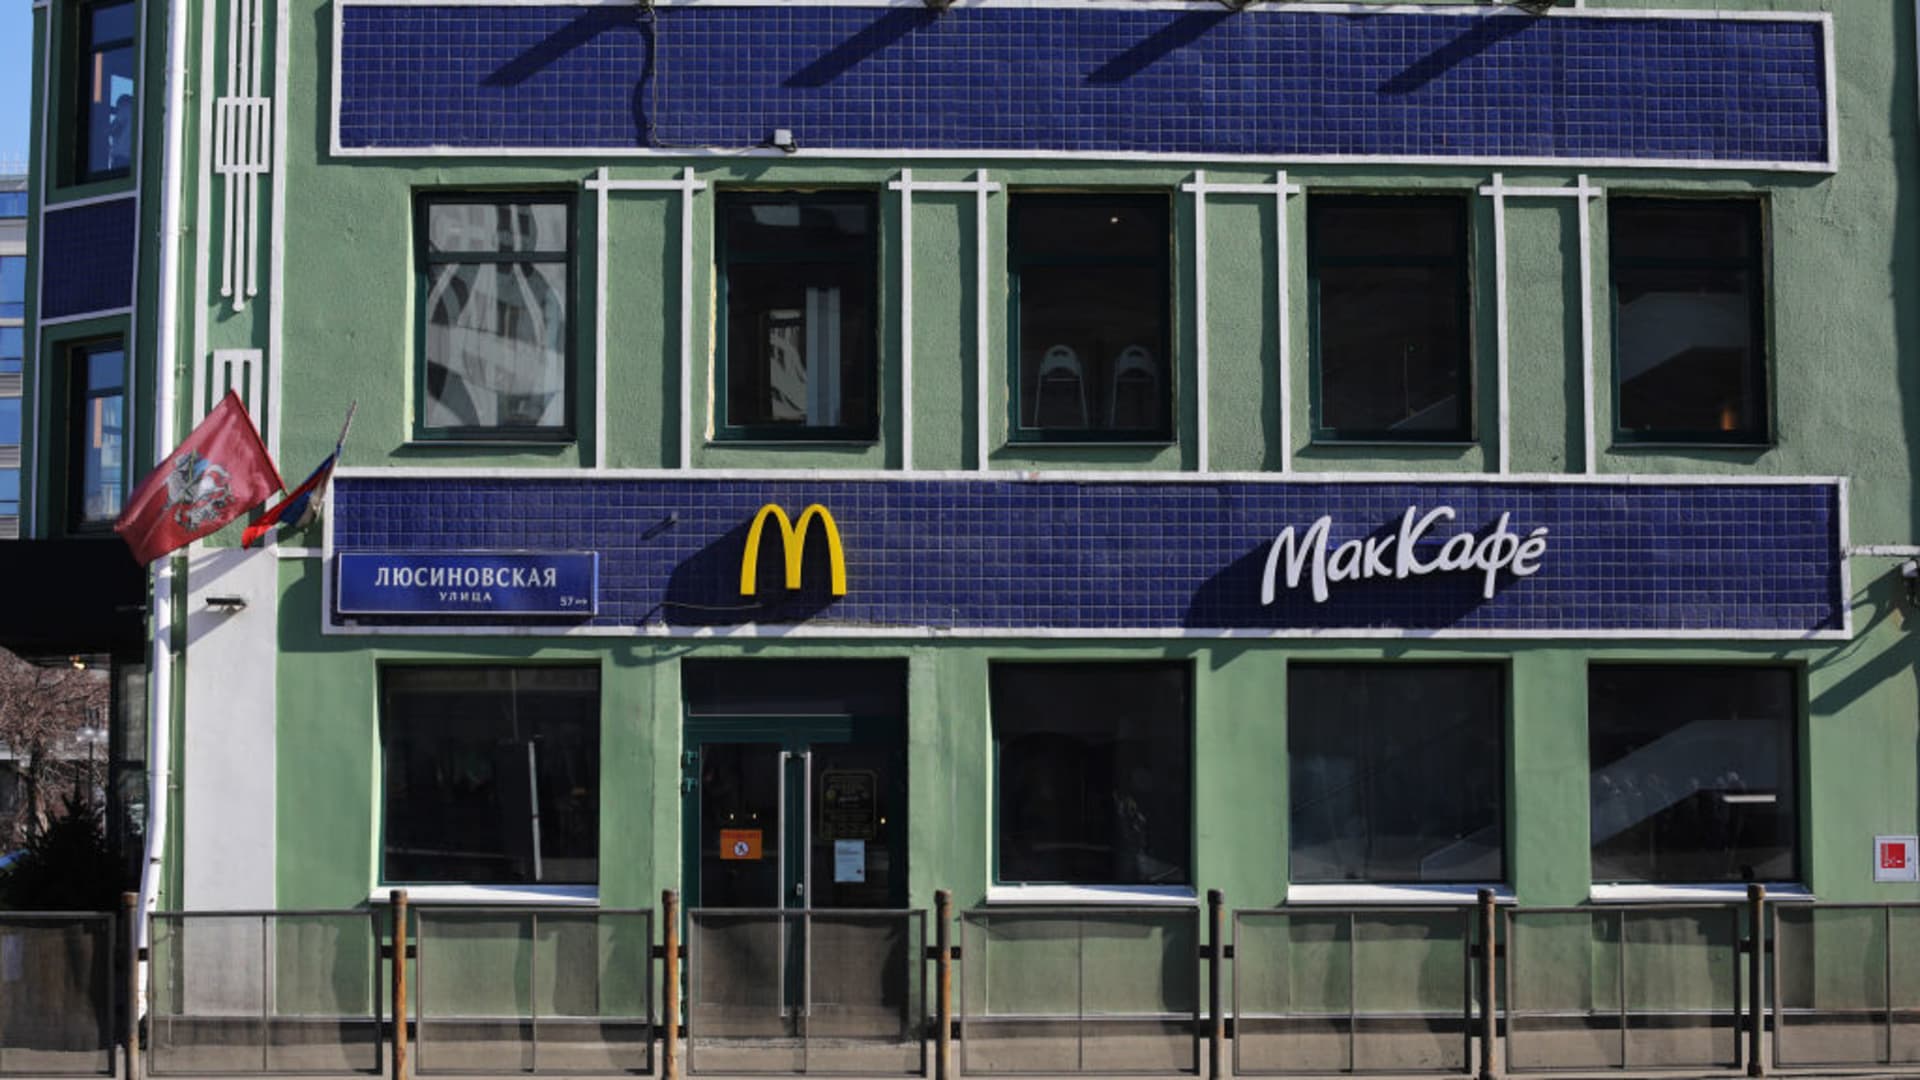 The logo of the closed McDonald's restaurant in the Aviapark shopping center in Moscow, Russia, March 18, 2022.